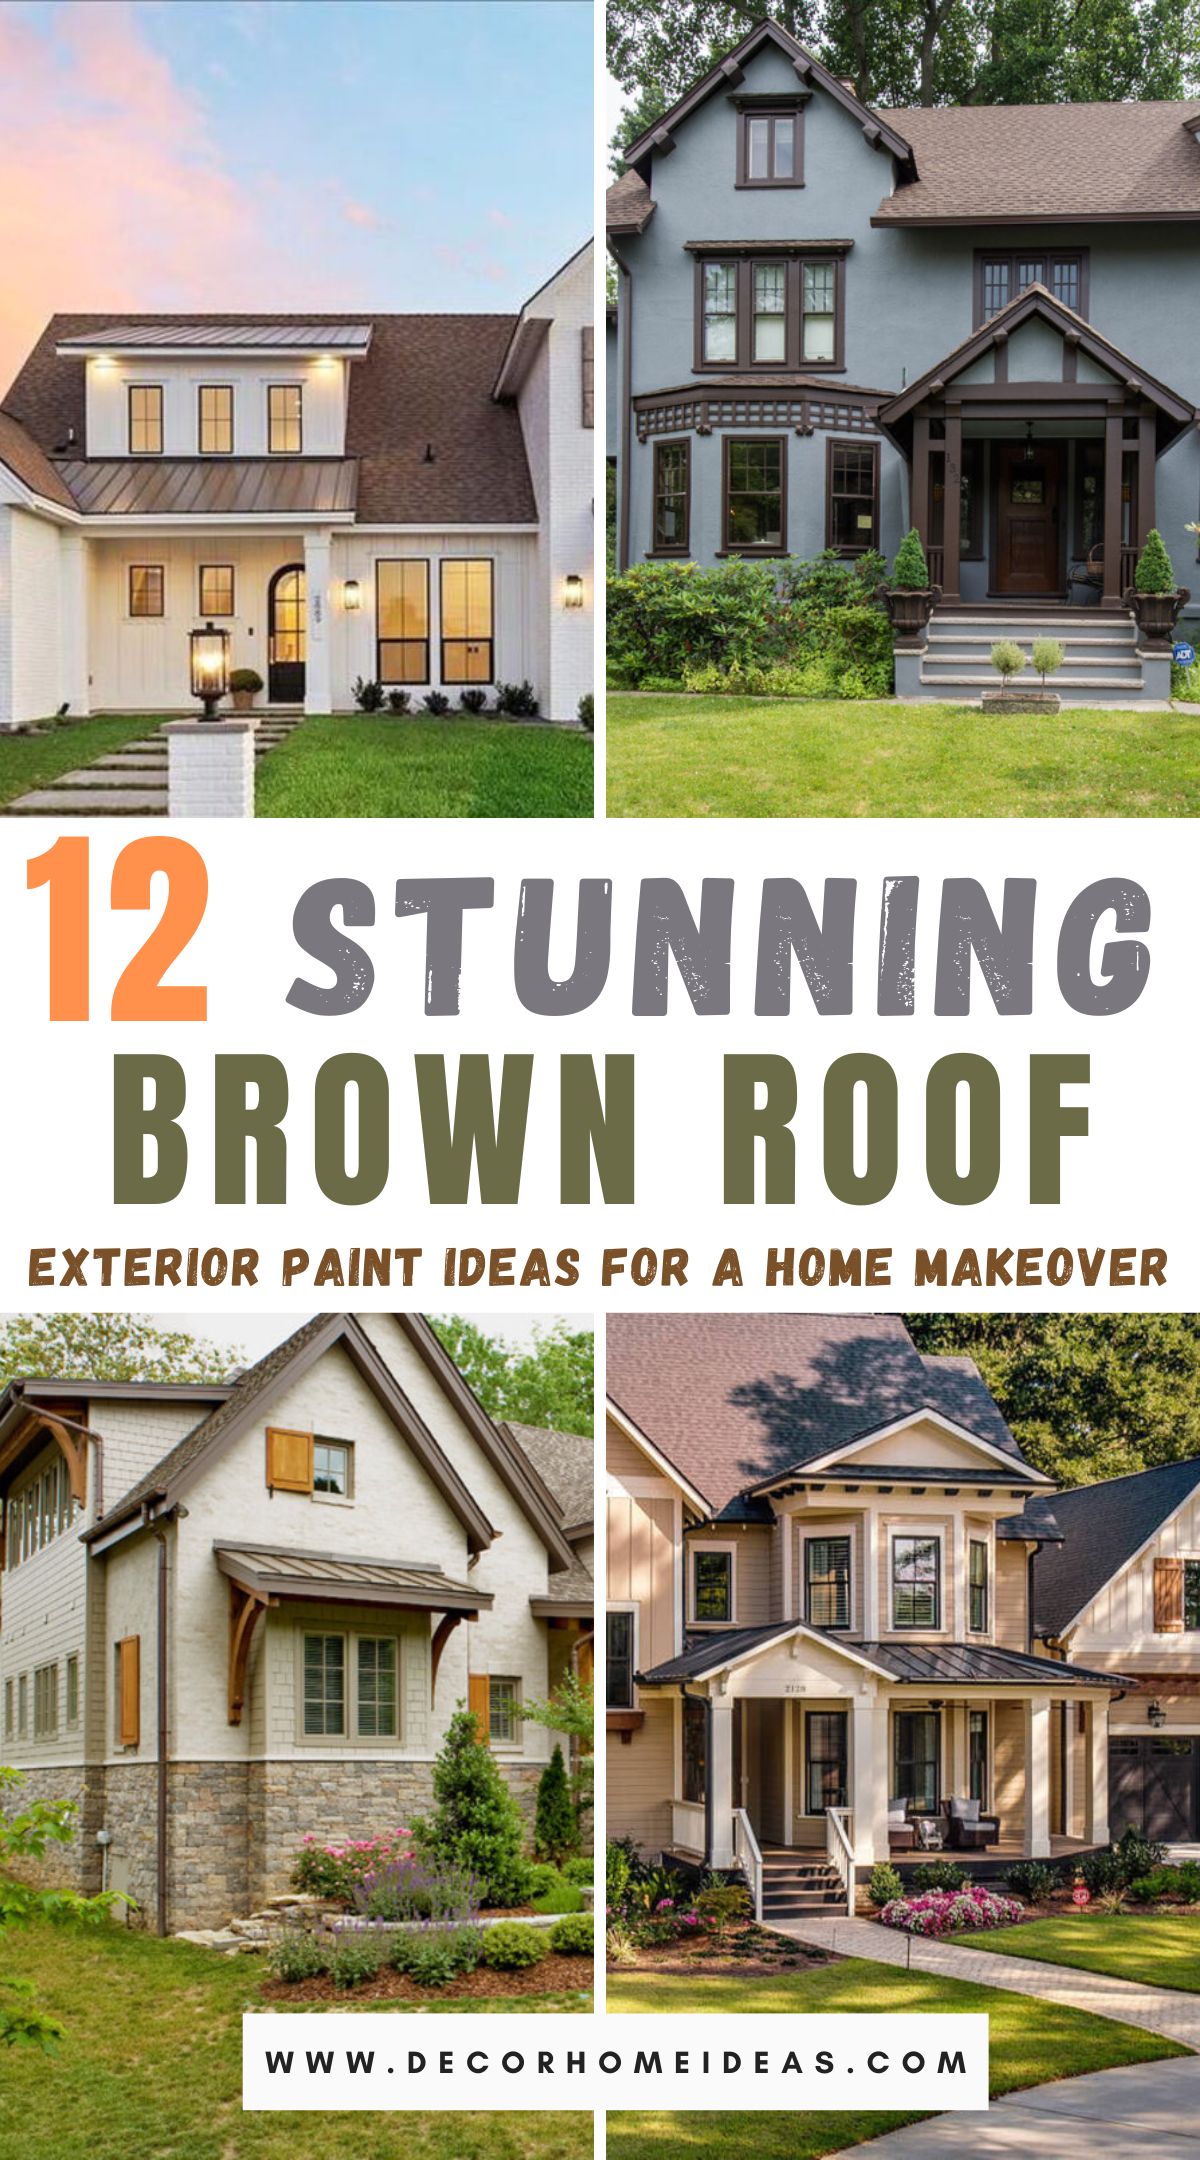 Revamp your home's exterior with these 12 stunning paint inspirations for brown roofs. Explore creative and elegant color palettes that enhance your home's curb appeal and elevate its overall look.